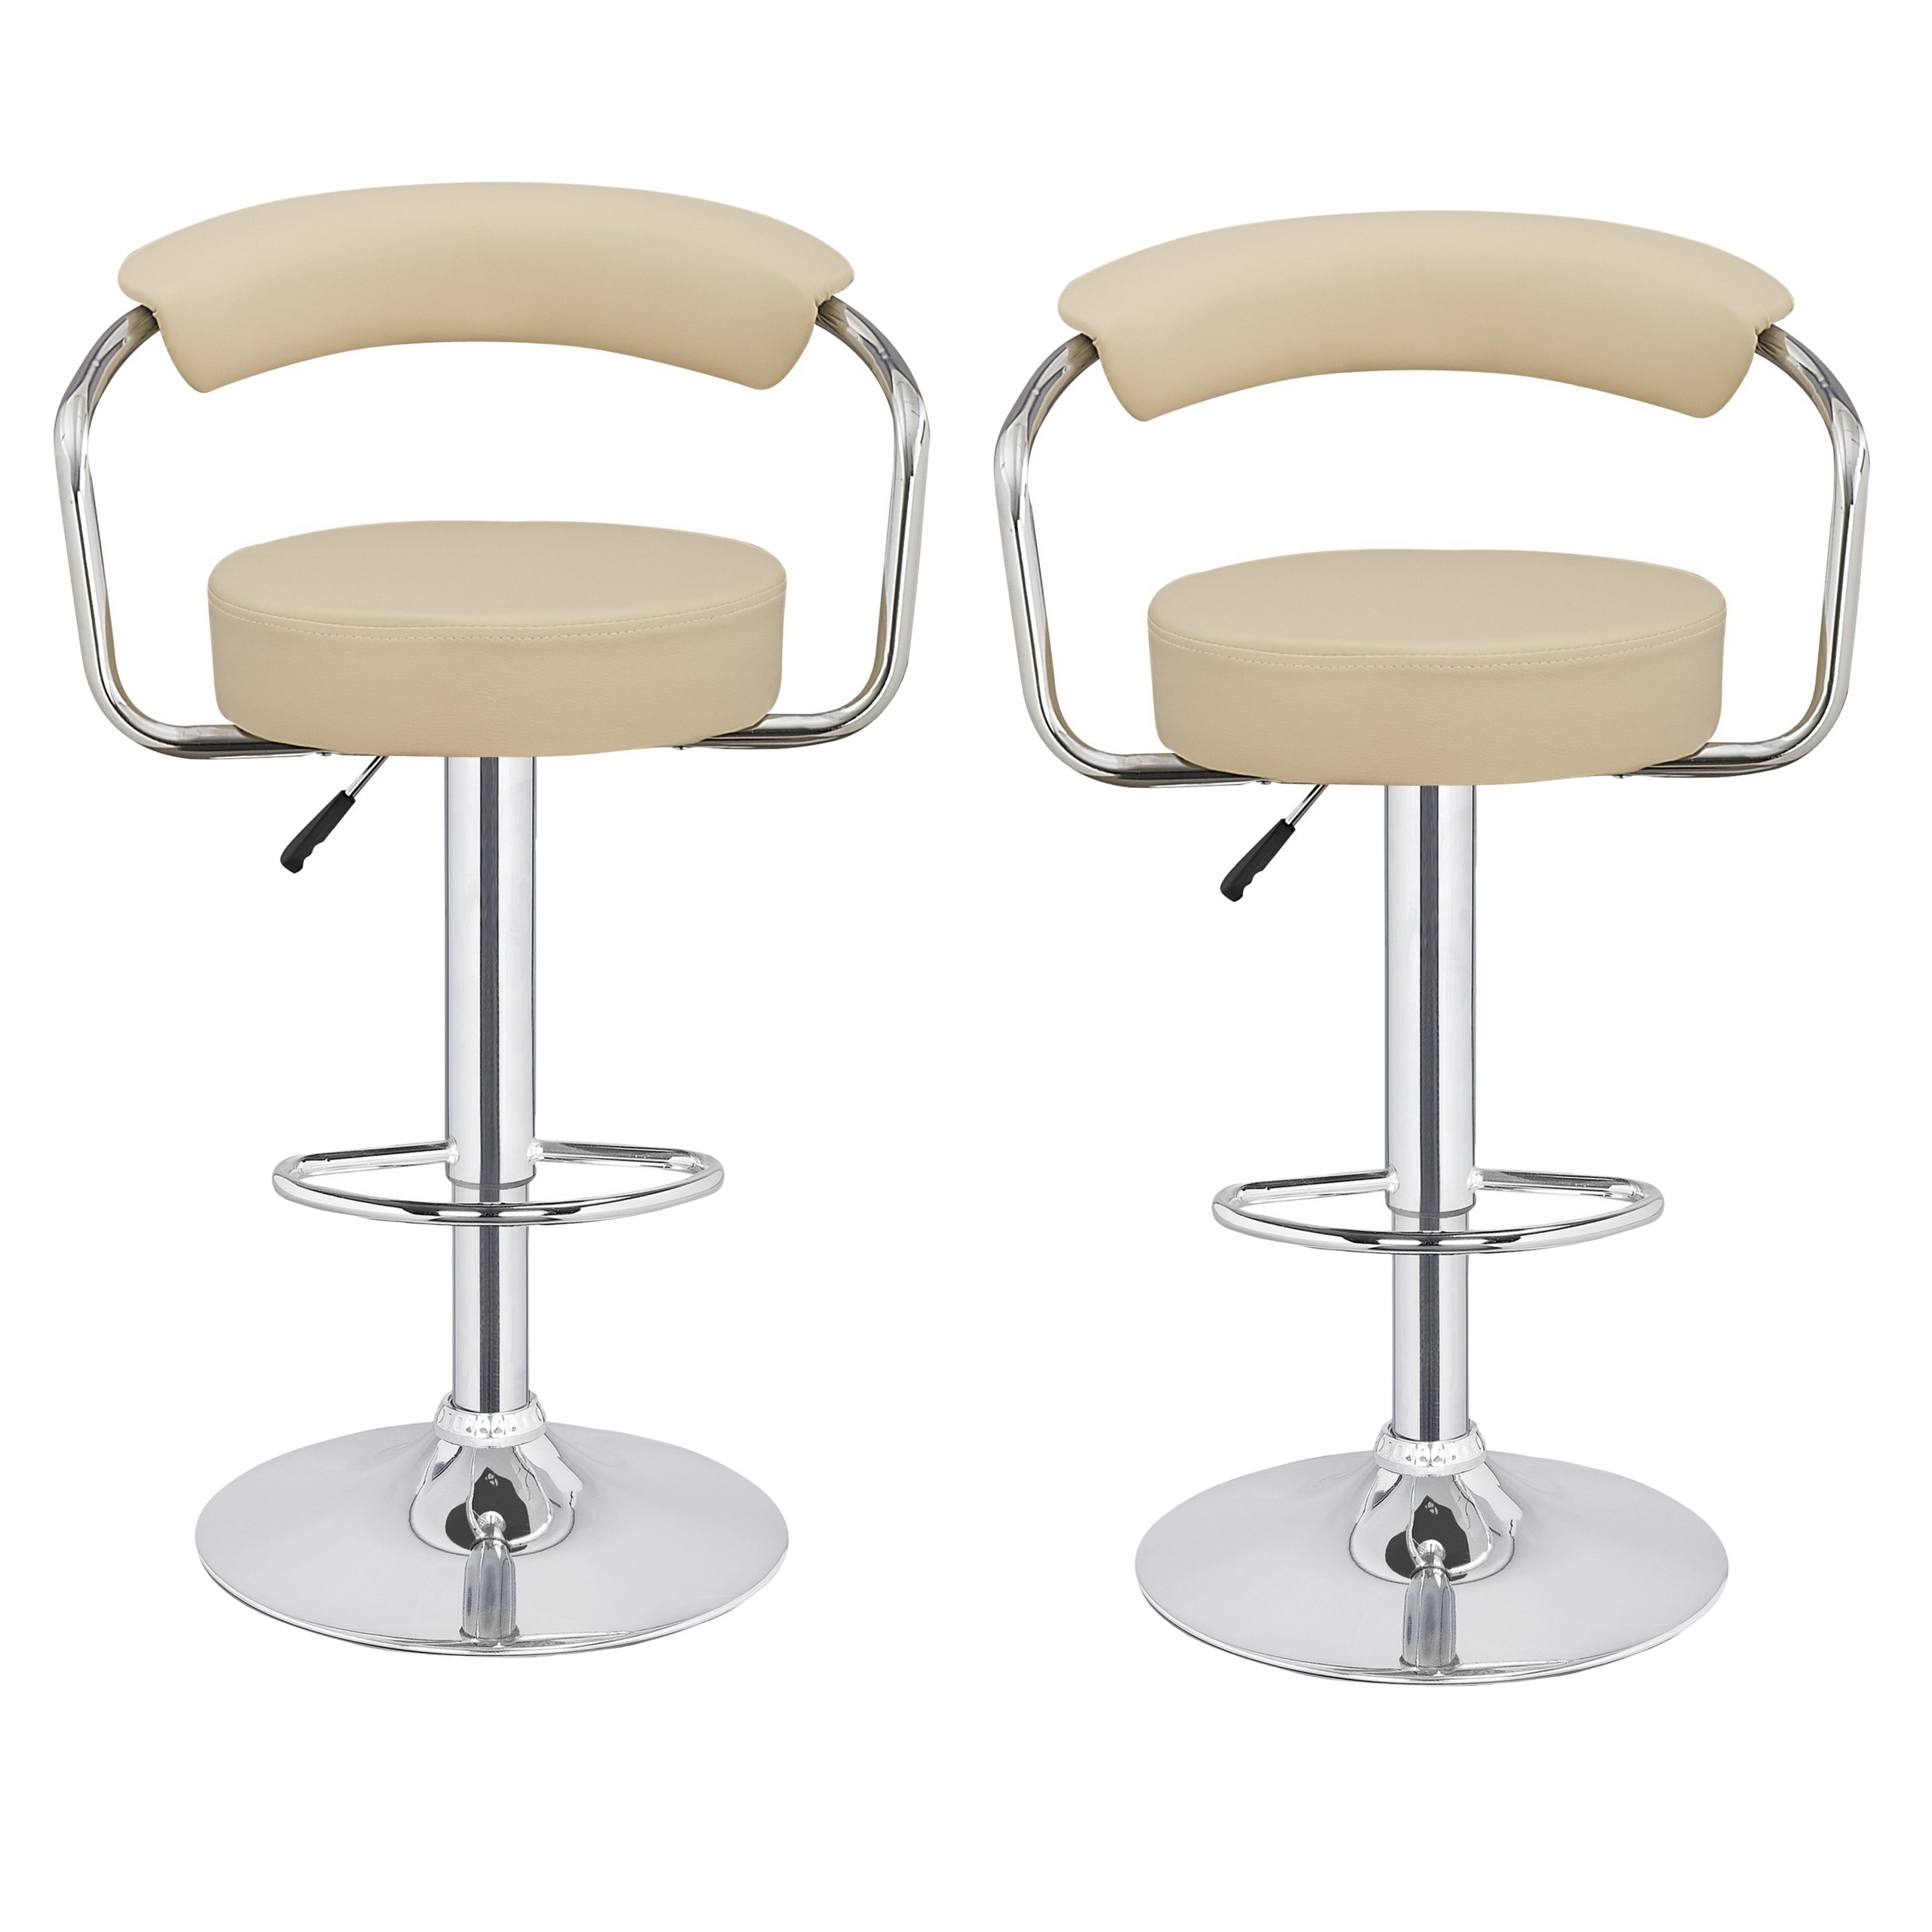 2 x Homegear M1 50s Diner Adjustable Swivel Faux Leather Bar Stools Cream